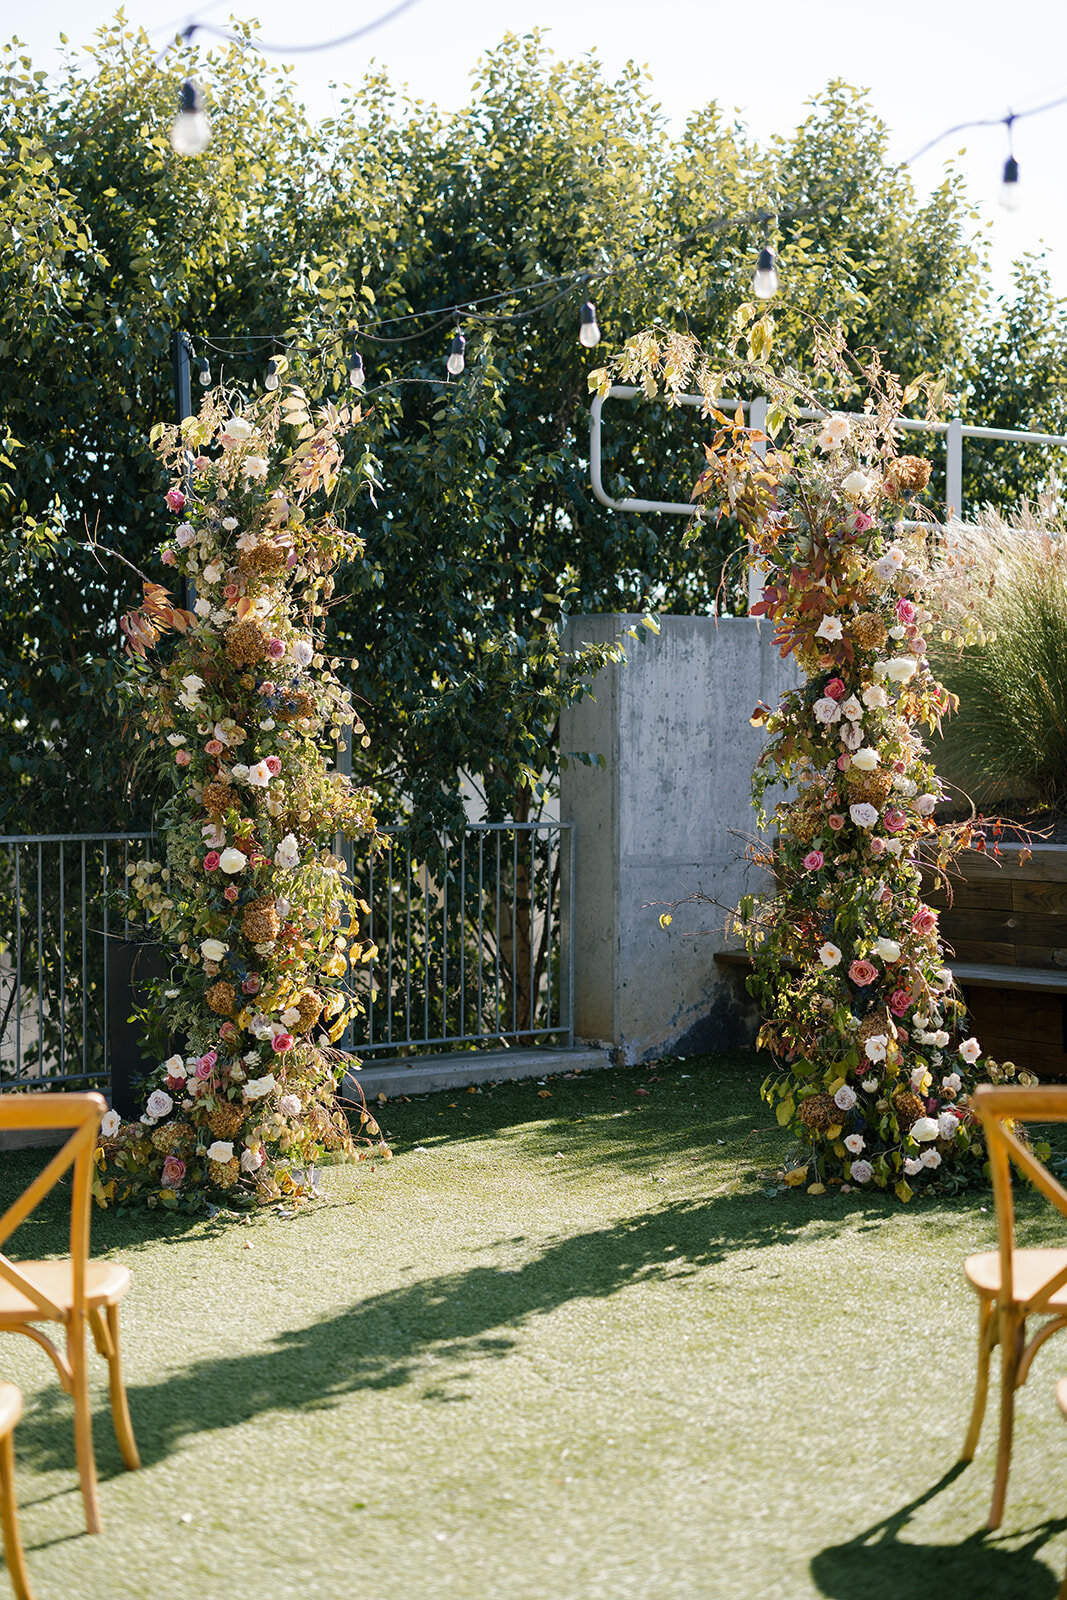 Broken Arch Ceremony Backdrop for fall Carolina’s wedding in Raleigh. Floral colors in mauve, cream, dusty pink, dusty blue, copper, and natural green. Floral accents of roses and fall color branches. Design by Rosemary and Finch Floral Design based out of Nashville, TN.